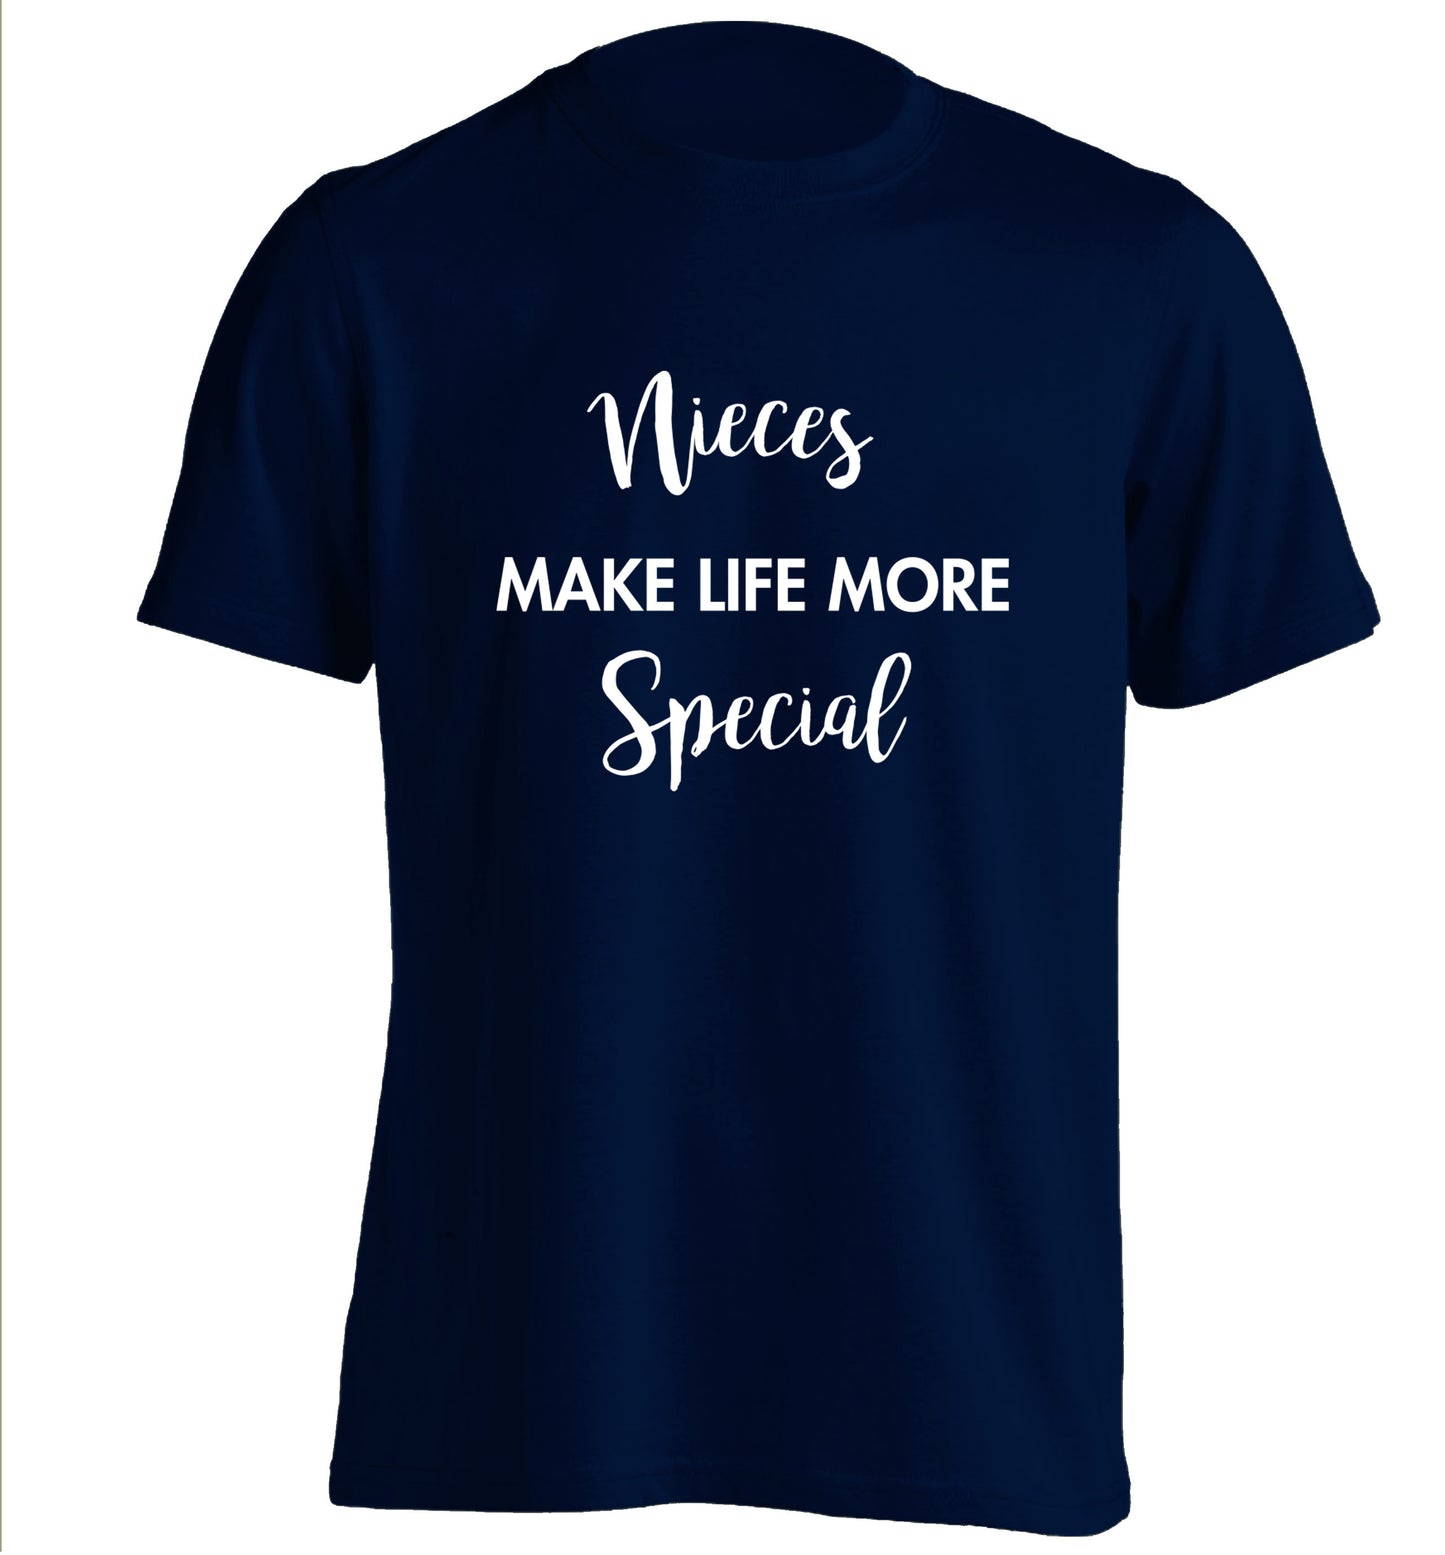 Nieces make life more special adults unisex navy Tshirt 2XL